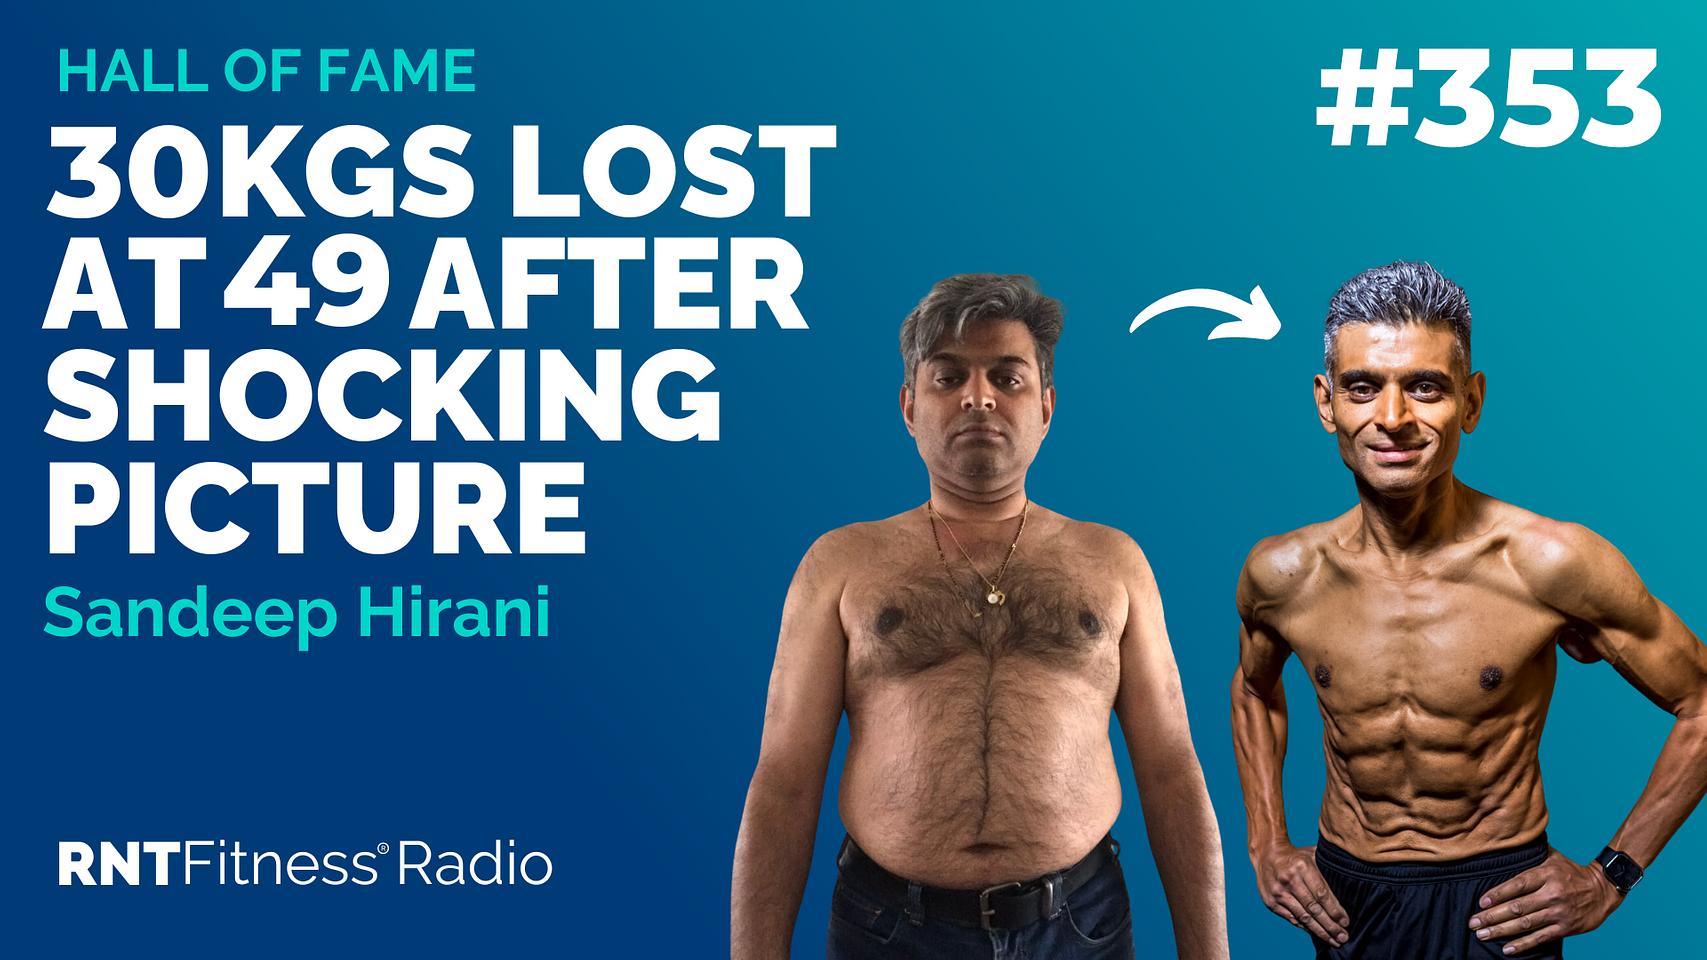 Ep 353 - Hall Of Fame | Sandeep Hirani: 30kgs Lost At 49 After Shocking Picture